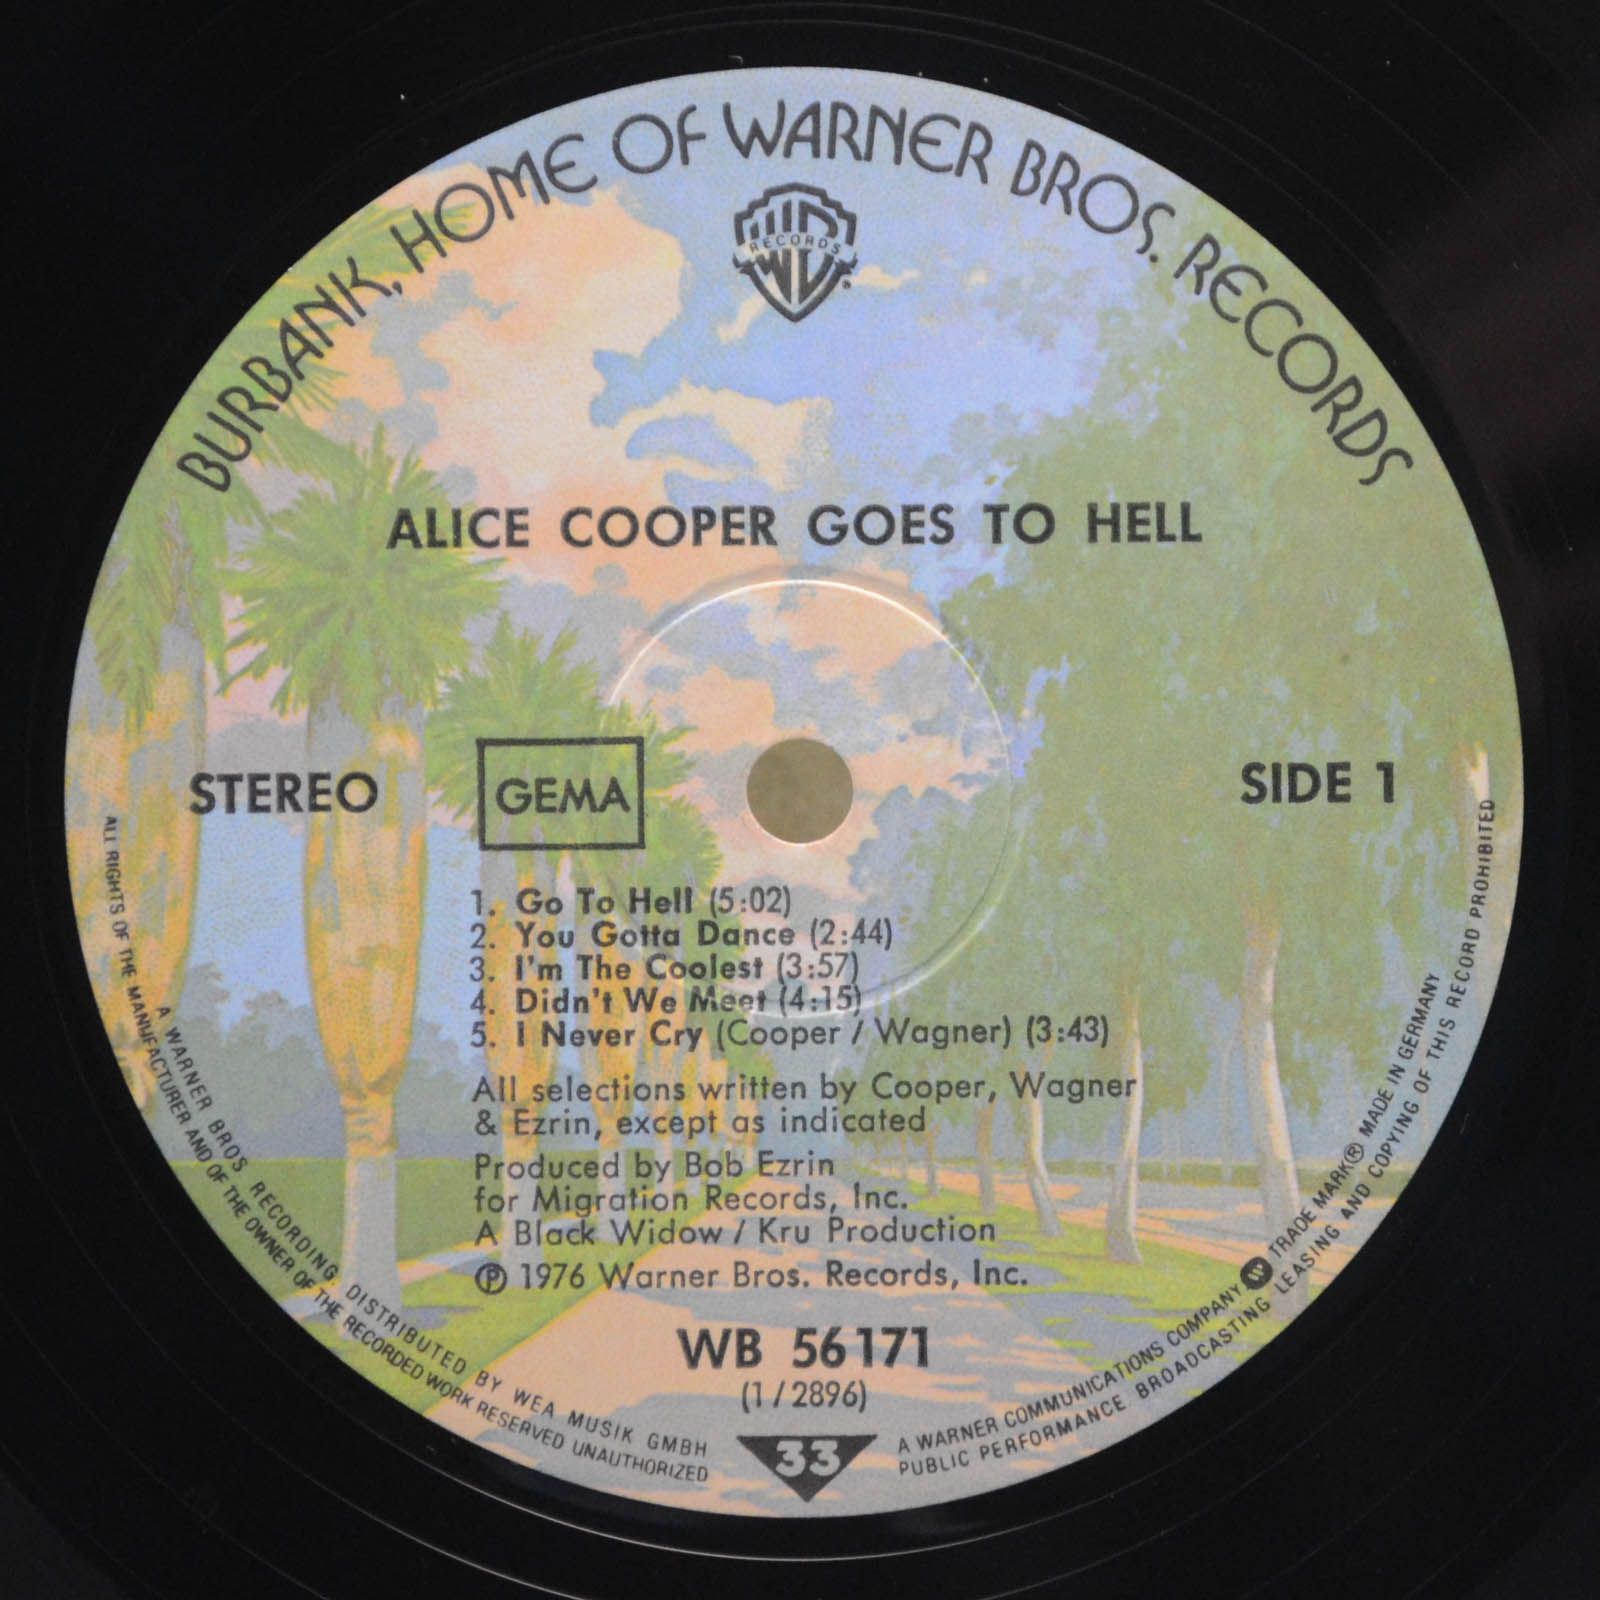 Alice Cooper — Goes To Hell, 1976